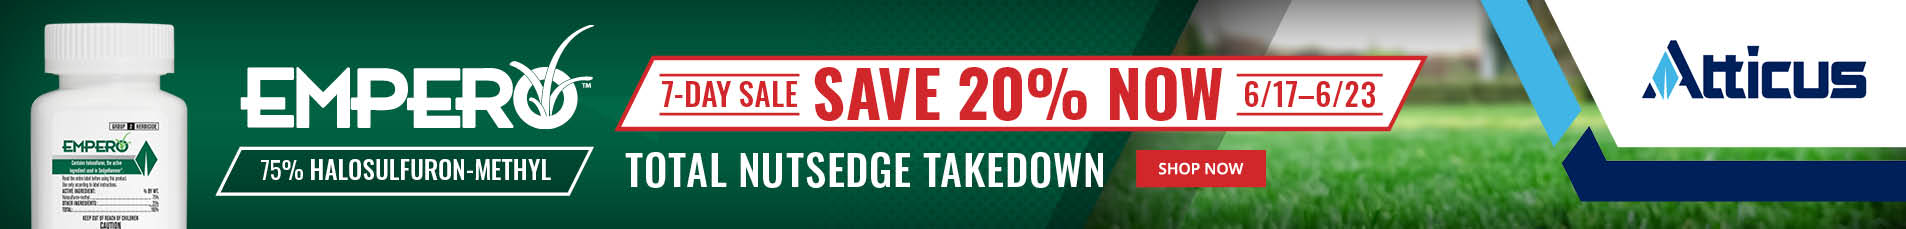 Empero 7-Day Sale Save 20% Off 6/17-6/23 Total Nutsedge Takedown